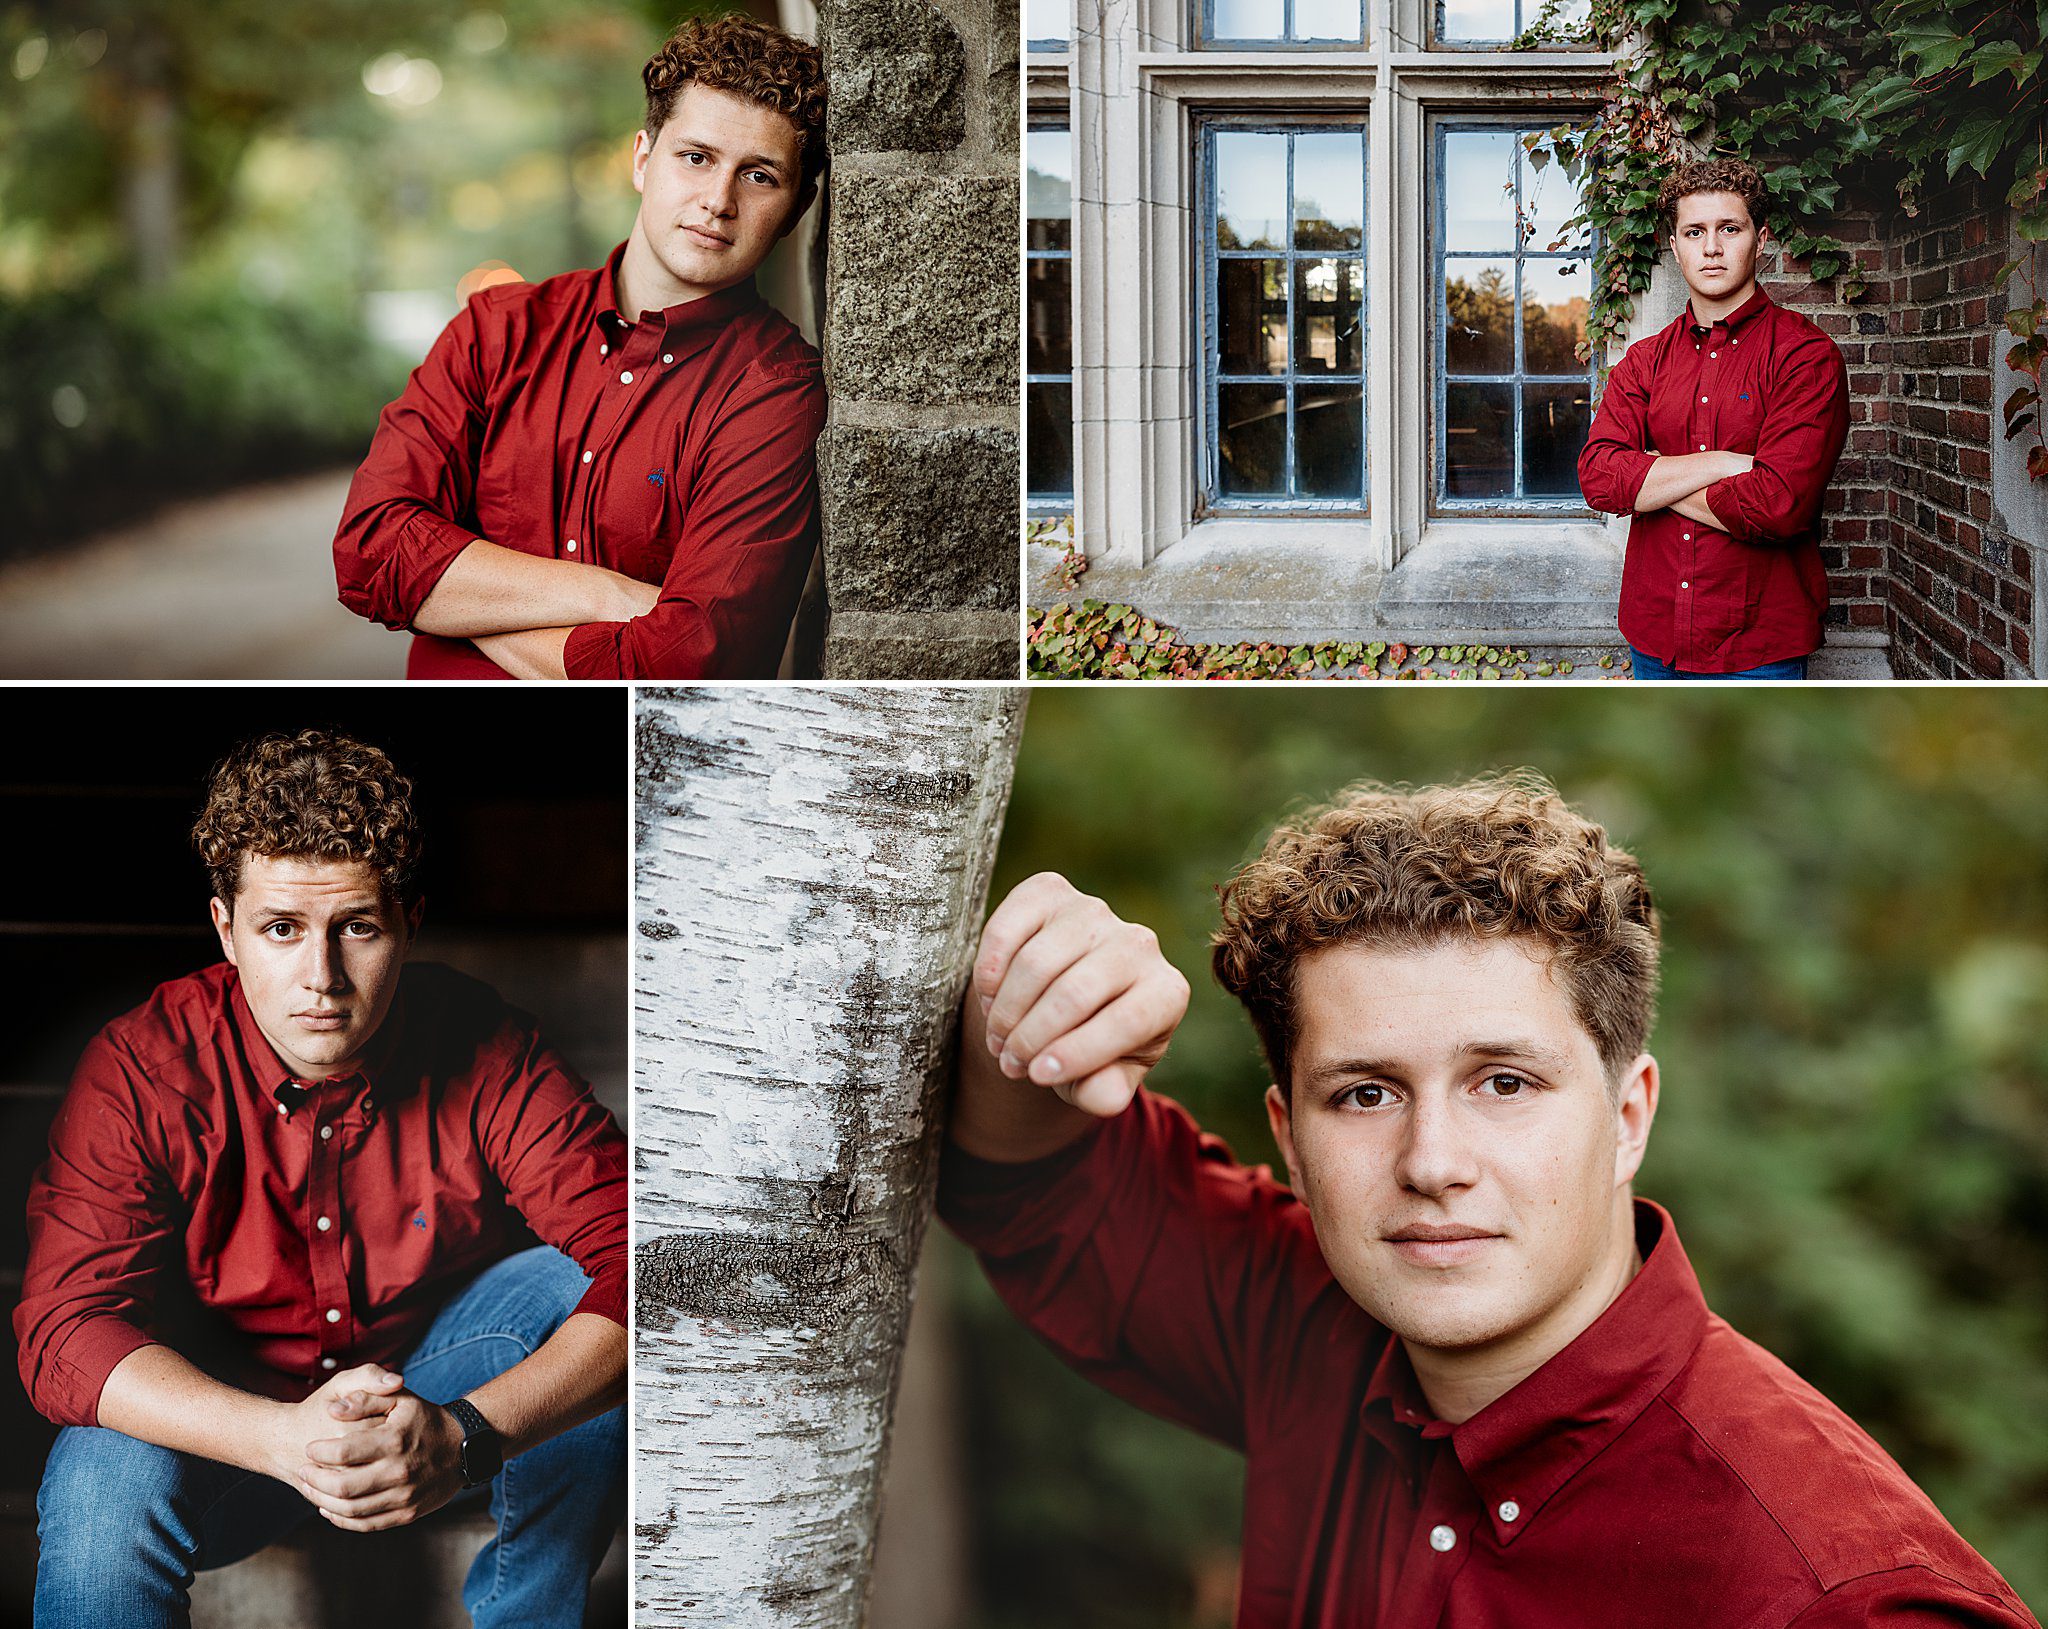 Boston senior portraits for guy in red button down shirt and jeans photographed by MA senior portrait photographer Helena Goessens Photography